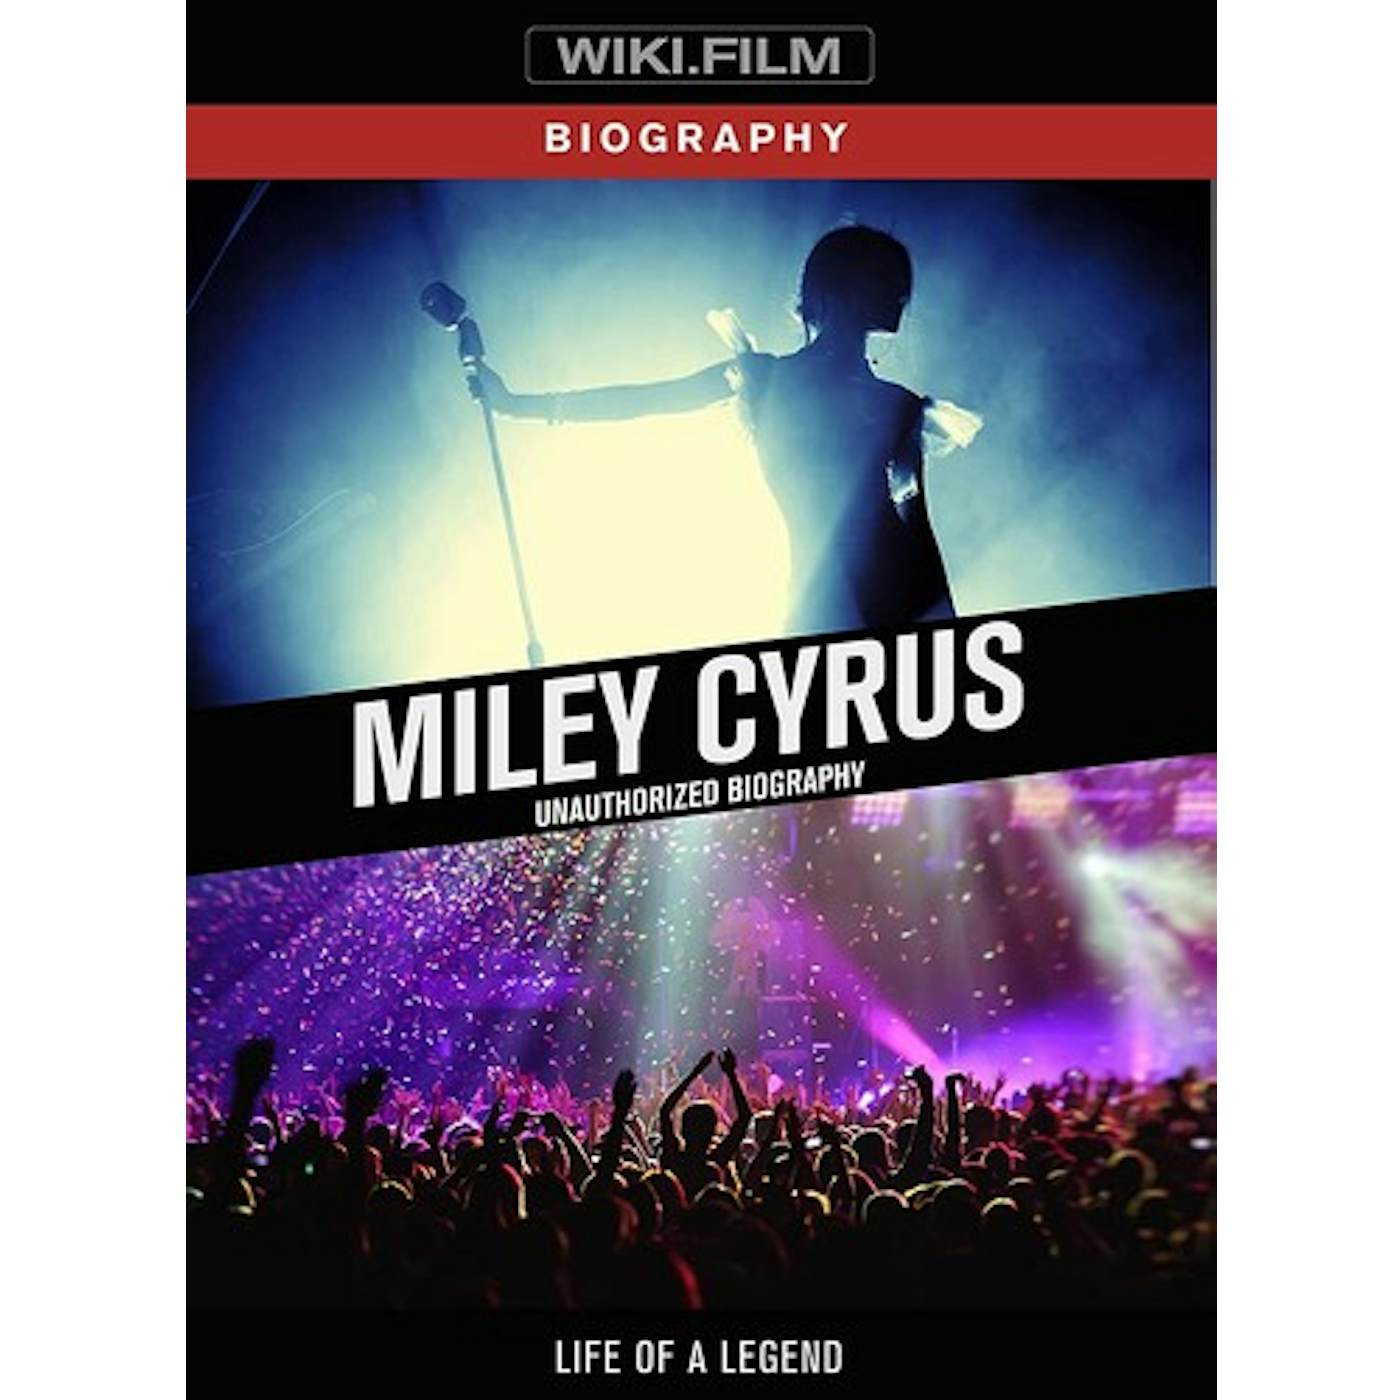 MILEY CYRUS: UNAUTHORIZED BIOGRAPHY DVD